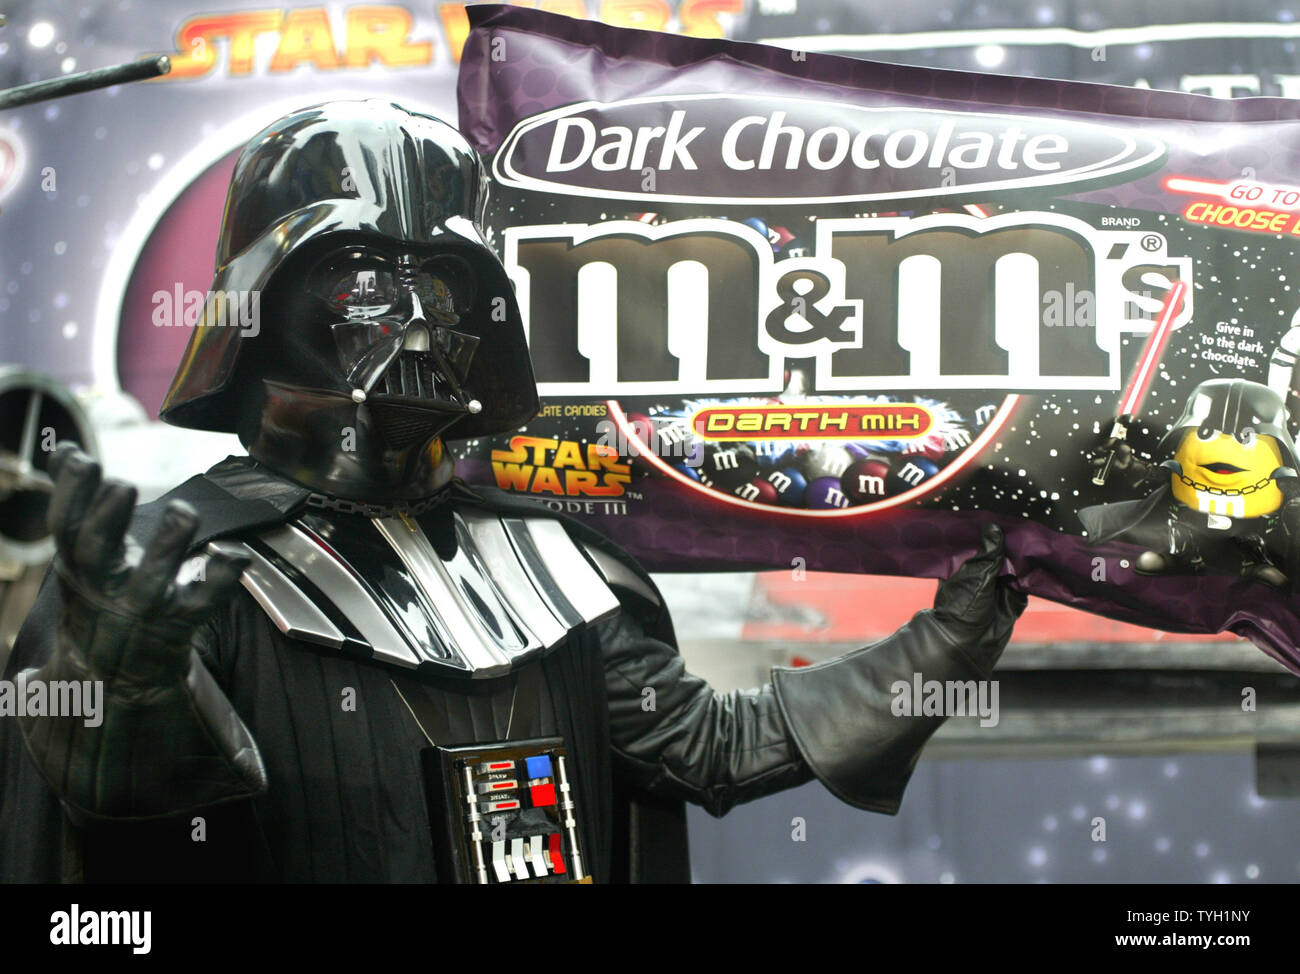 Star Wars character Darth Vader holds up a model of the new Star War-themed M&M's which is unveiled in Time Square on March 29, 2005 in New York City. Masterfoods USA, the makers of M&M's, is marketing a dark chocolate version of the popular candy as they promote the movie 'Star Wars:Episode III Revenge of the Sith.' (UPI Photo/Monika Graff) Stock Photo